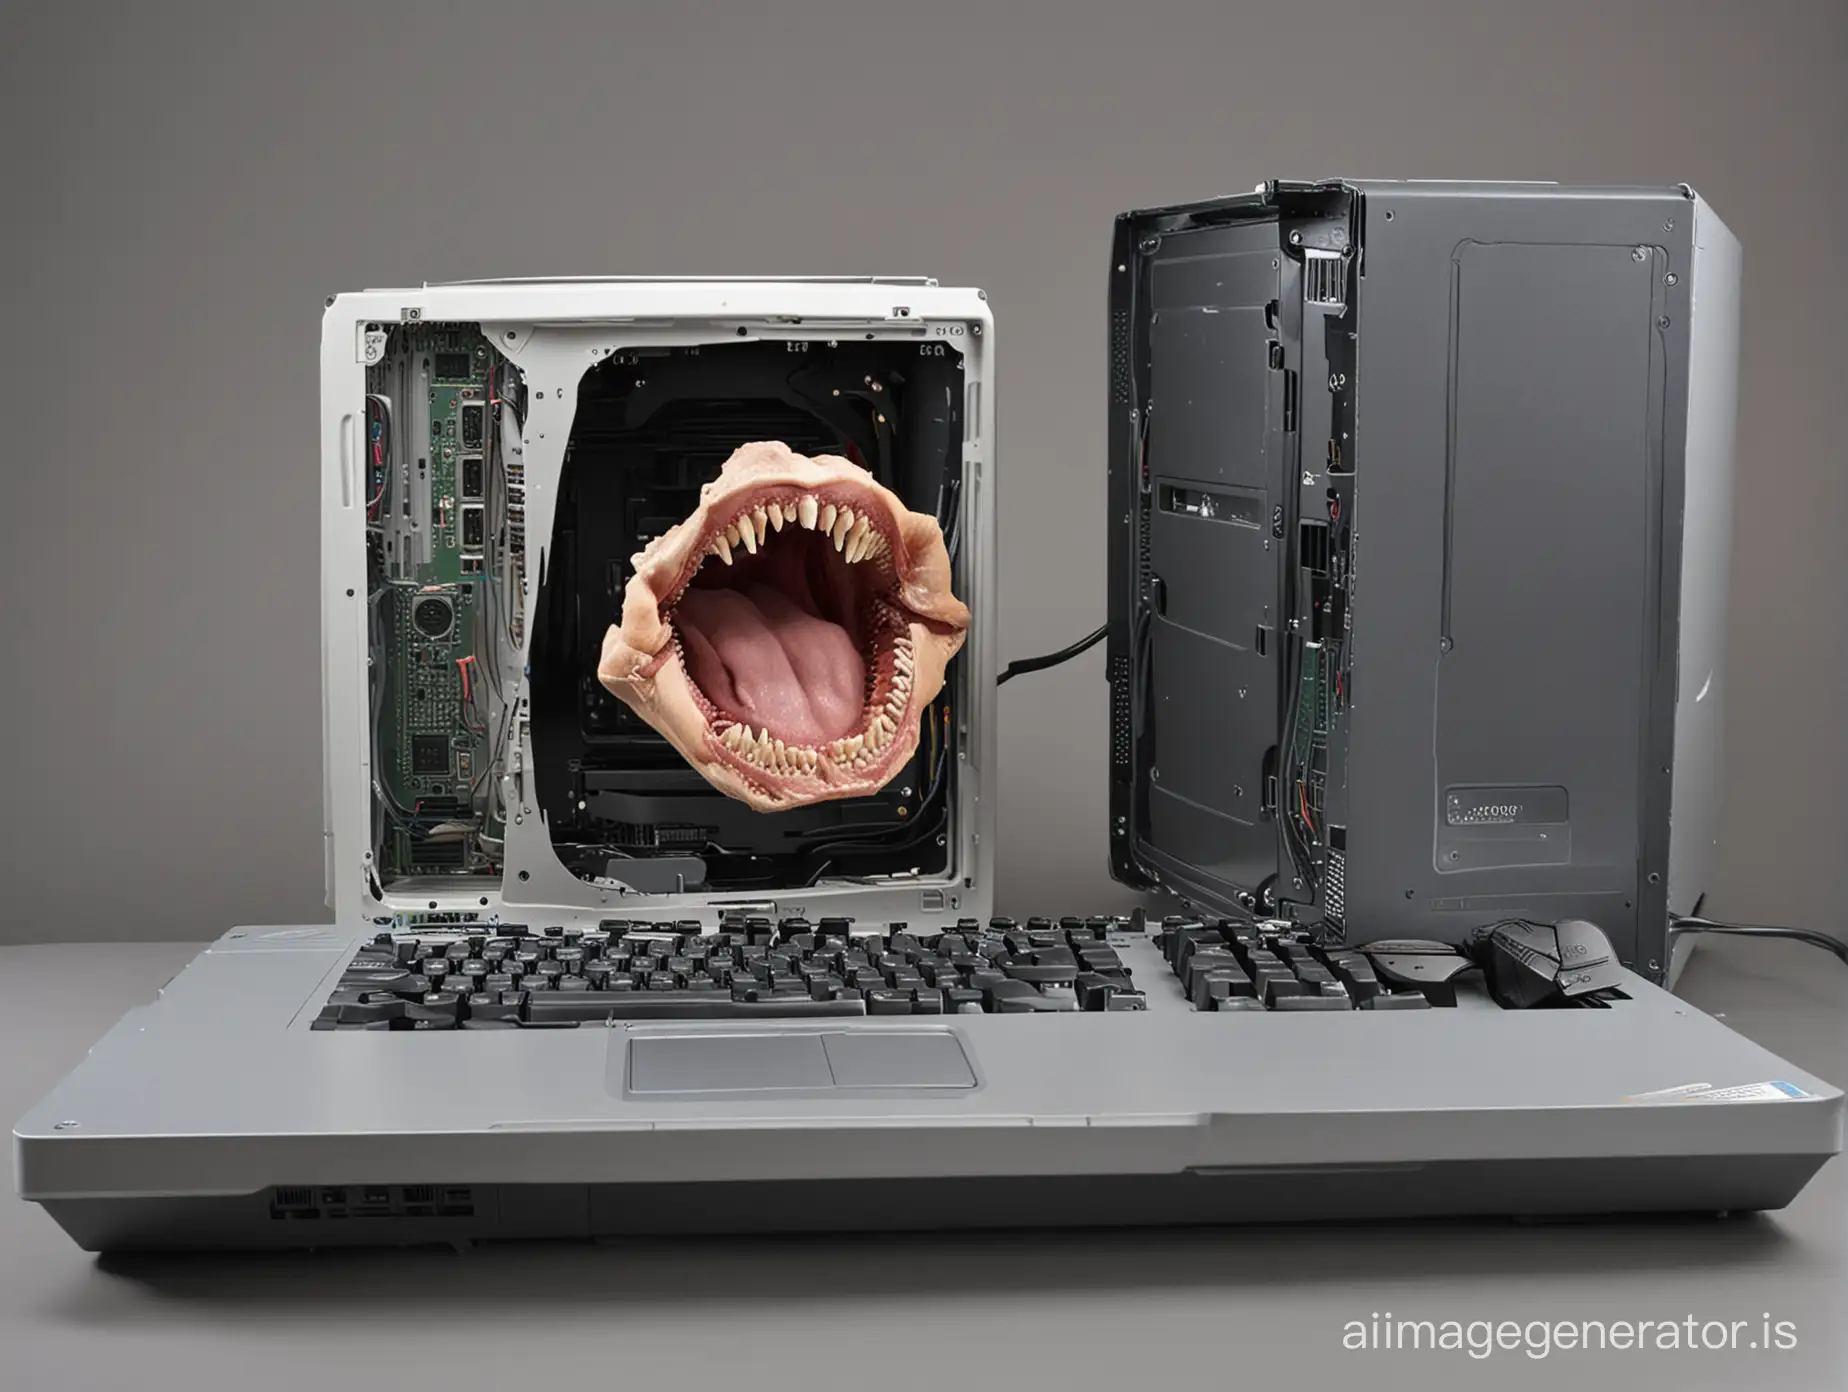 TechSavvy-Gadget-Devouring-Another-Device